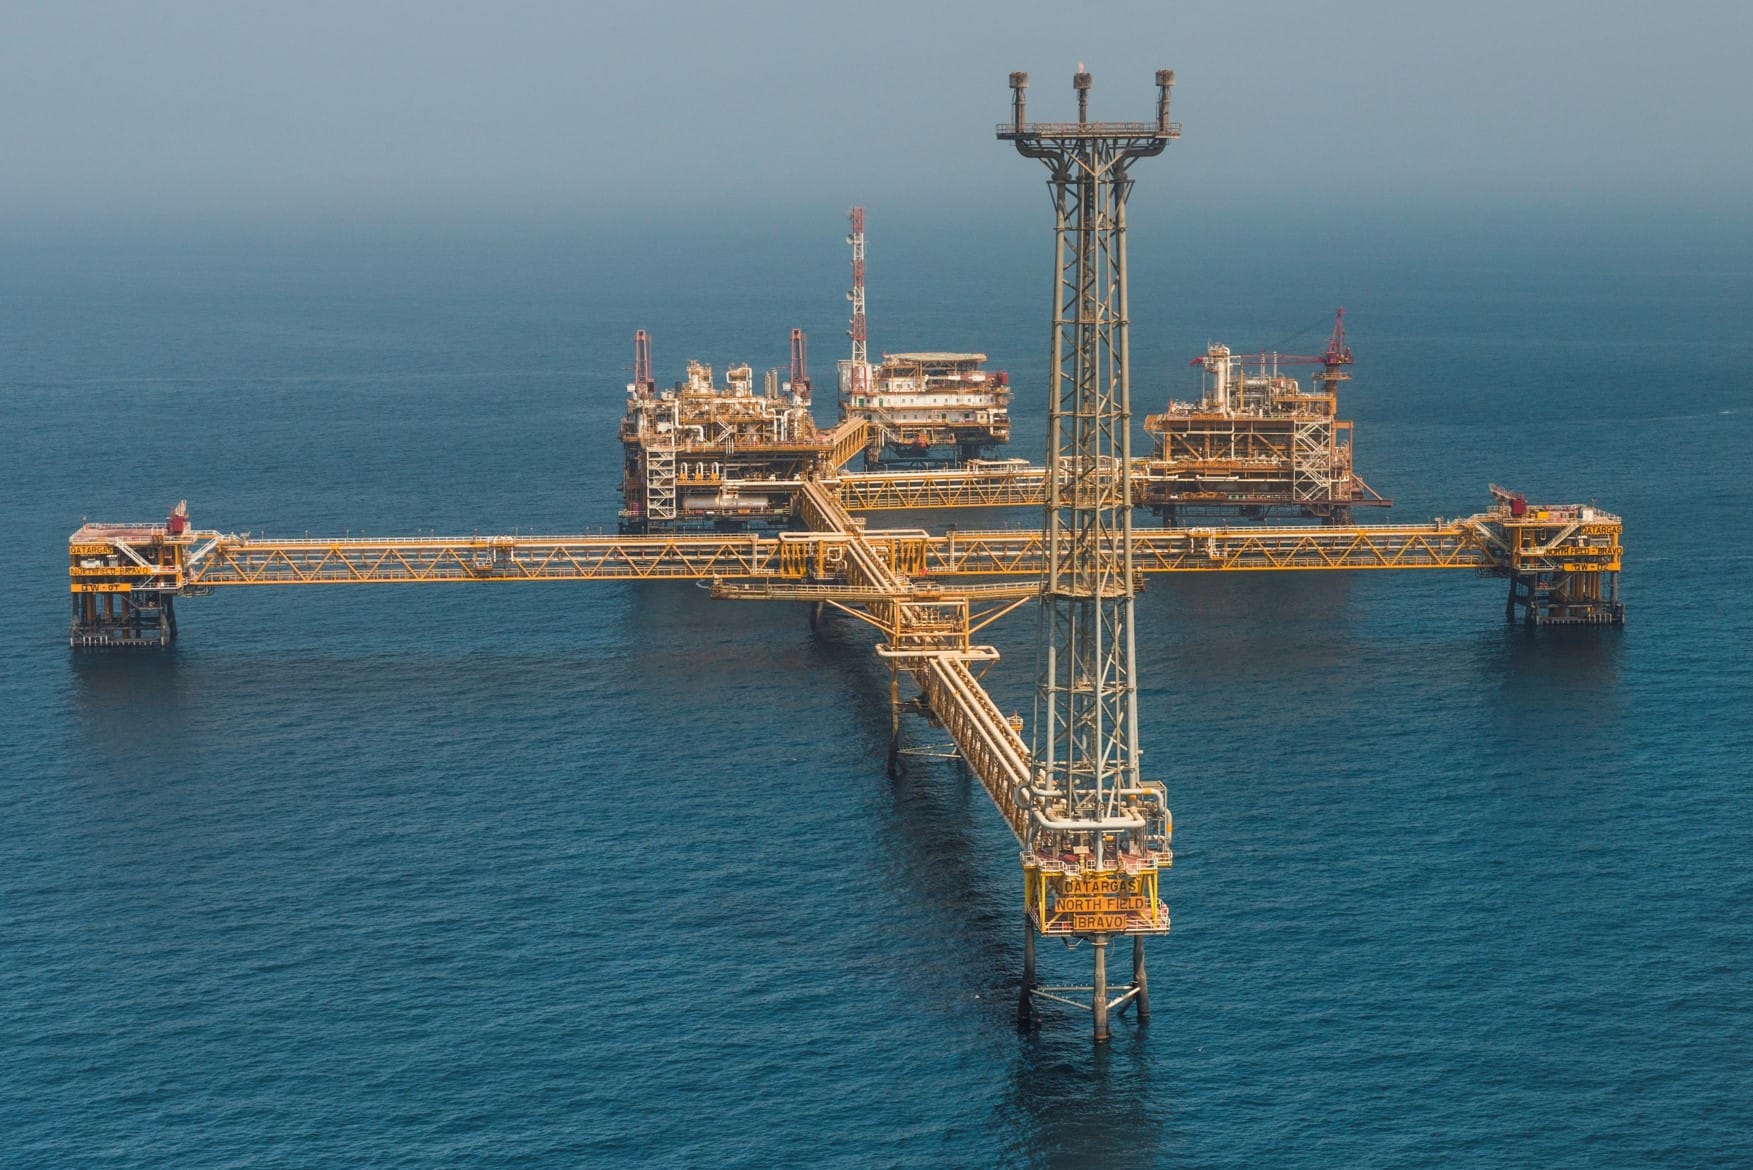 QatarEnergy signs up for initiative to remove methane footprint from oil & gas industry